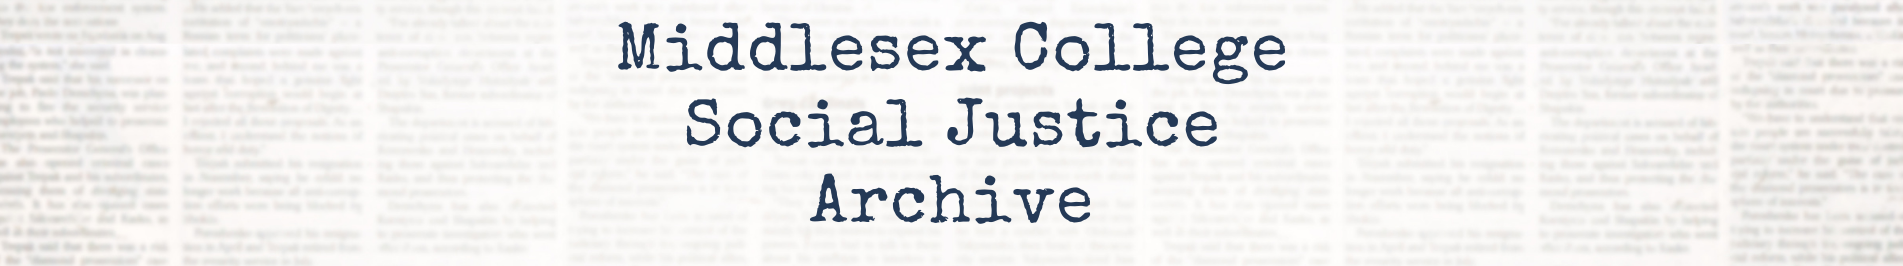 Middlesex College Social Justice Archive